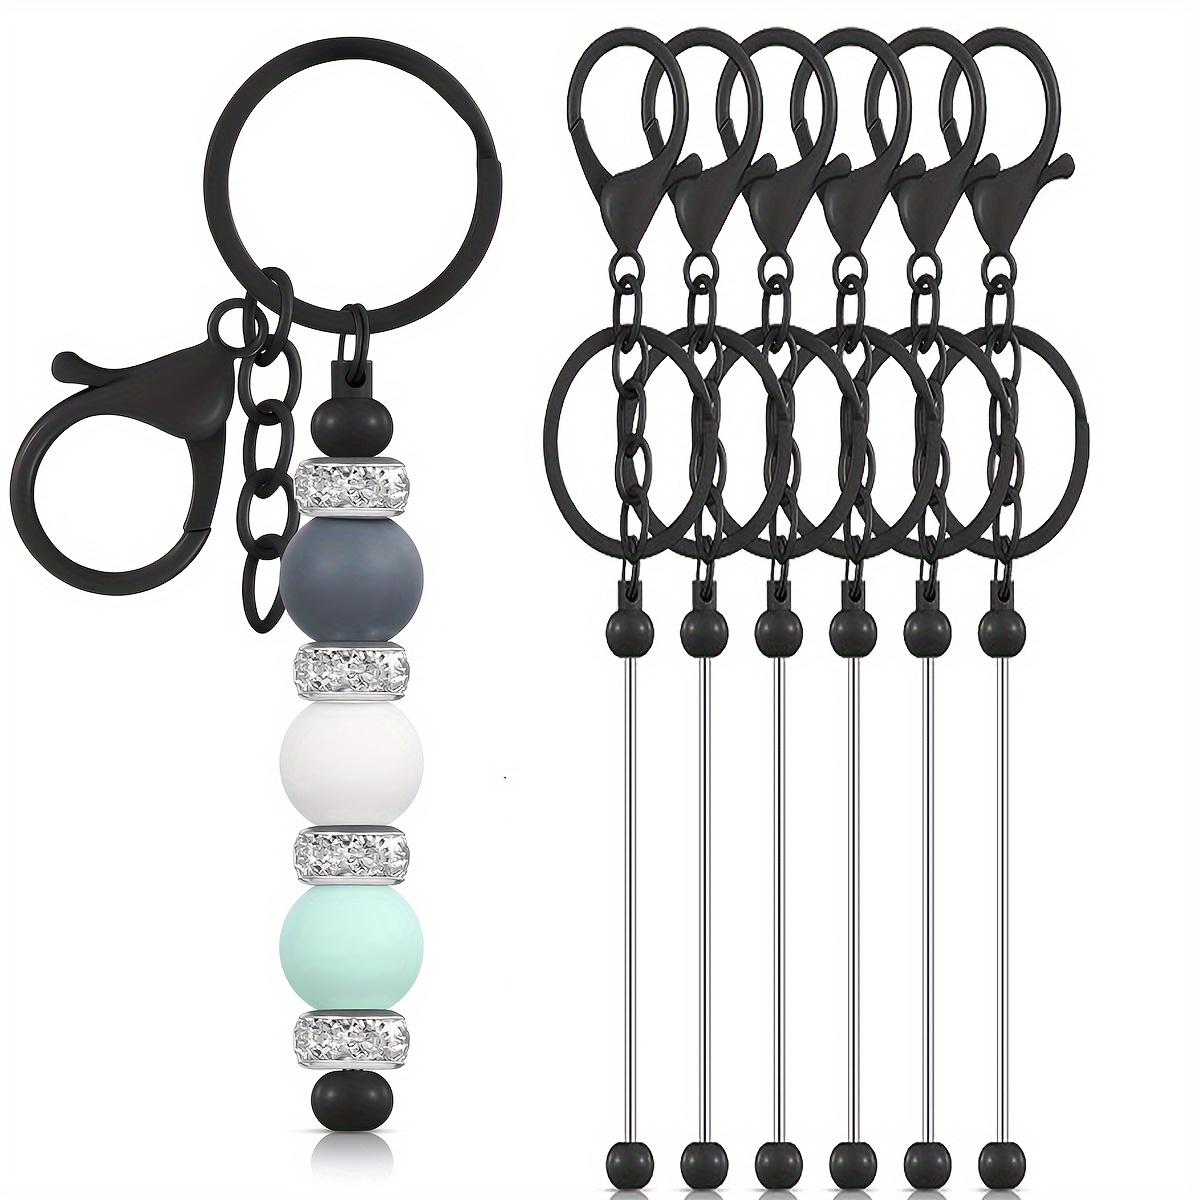 DIY Silver Keyring Making Accessories: Chain Keychain Rings With Screw Eye  Pins Bulk From Shmily2019, $12.42